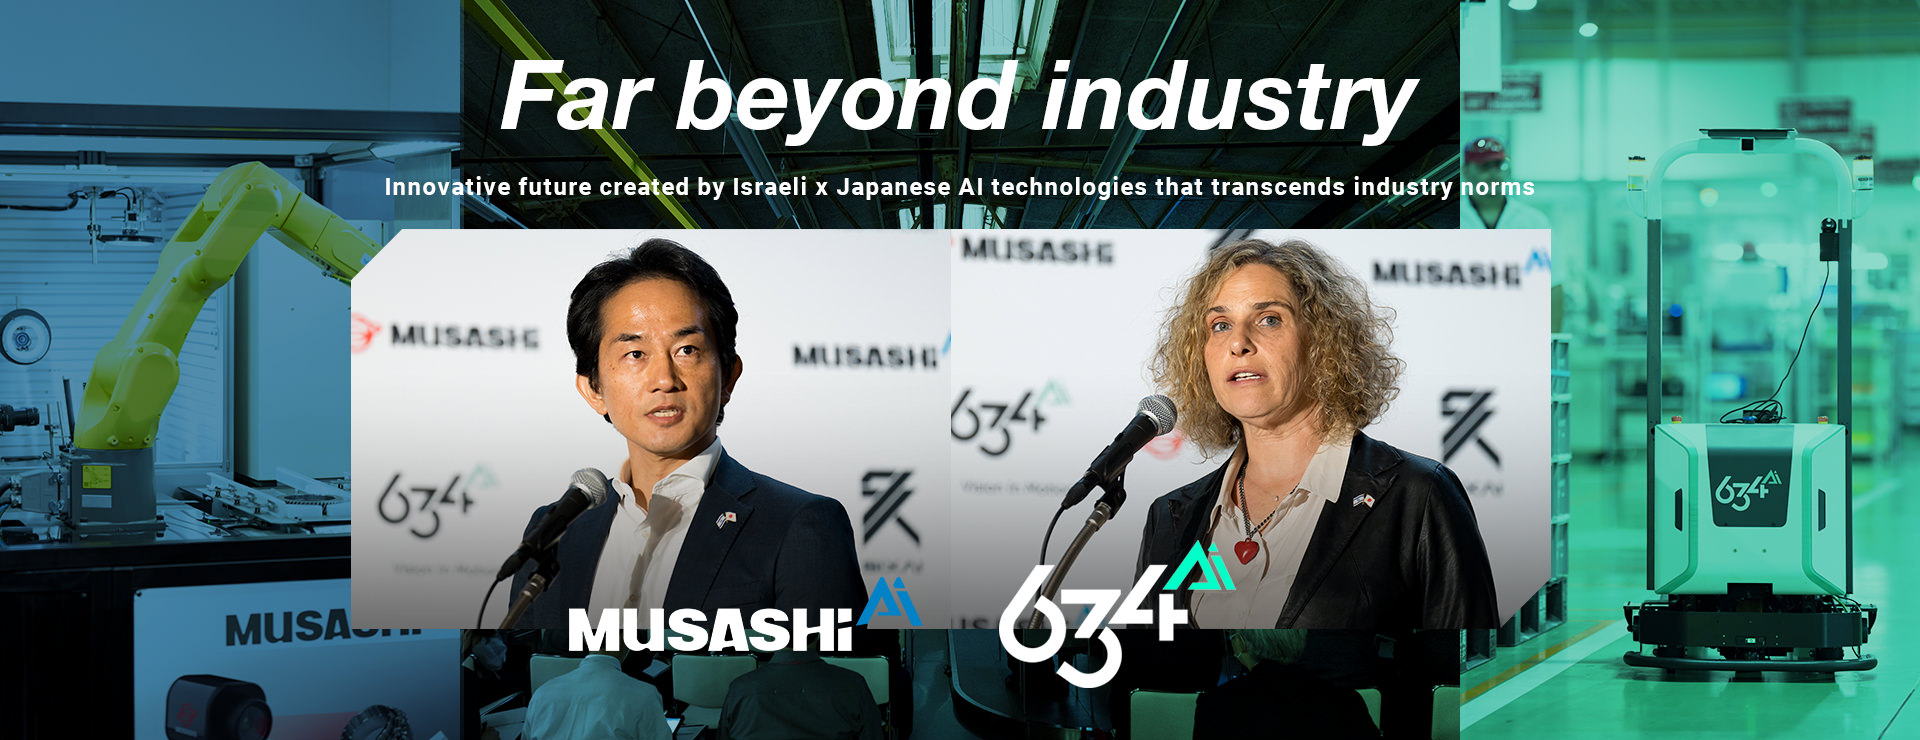 「Far beyond industry」- Innovative future created by Israeli x Japanese AI technologies that transcends industry norms